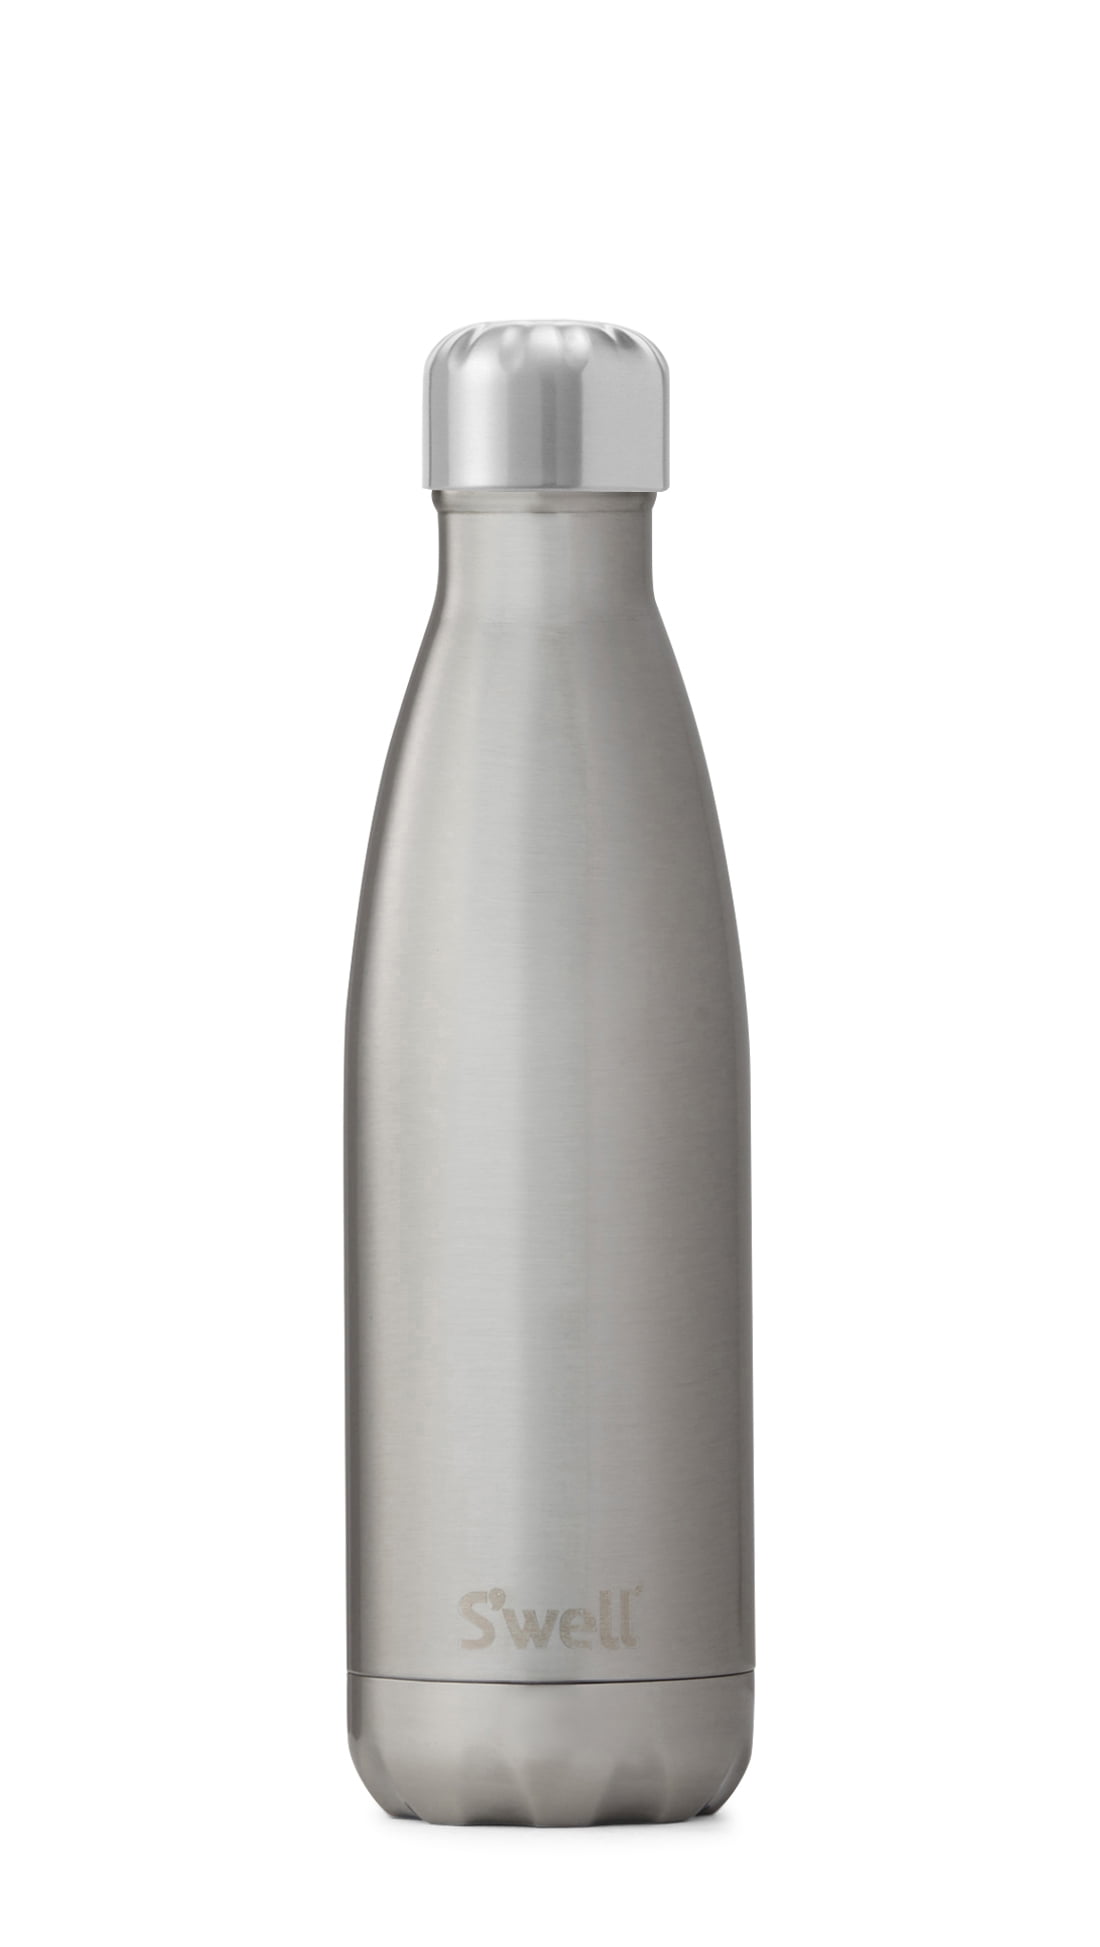 S'well Vacuum Insulated Stainless Steel Water Bottle, Silver Lining, 17 S'well Stainless Steel Water Bottle